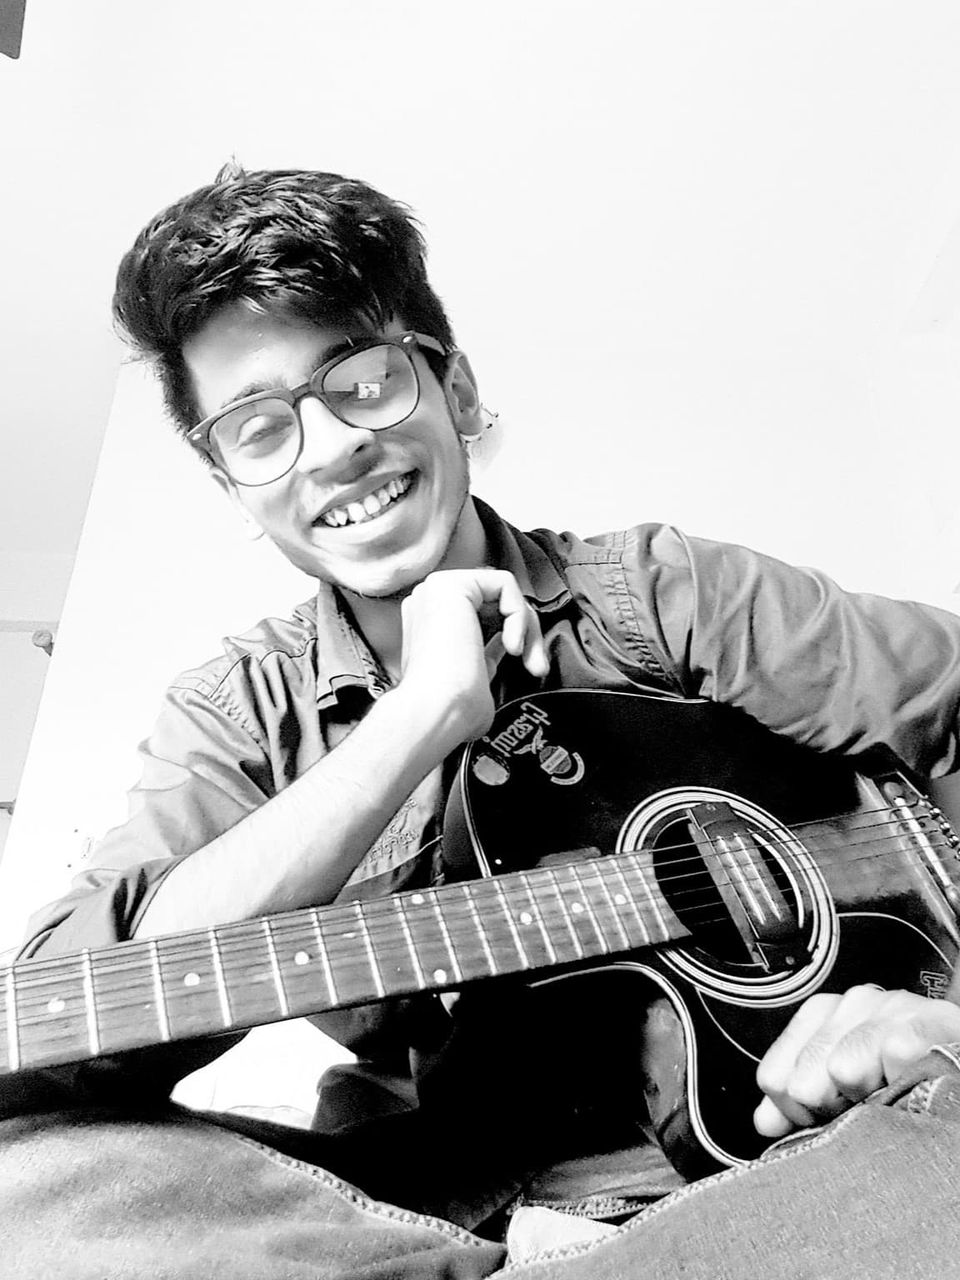 Image of Anirban Das with a guitar.